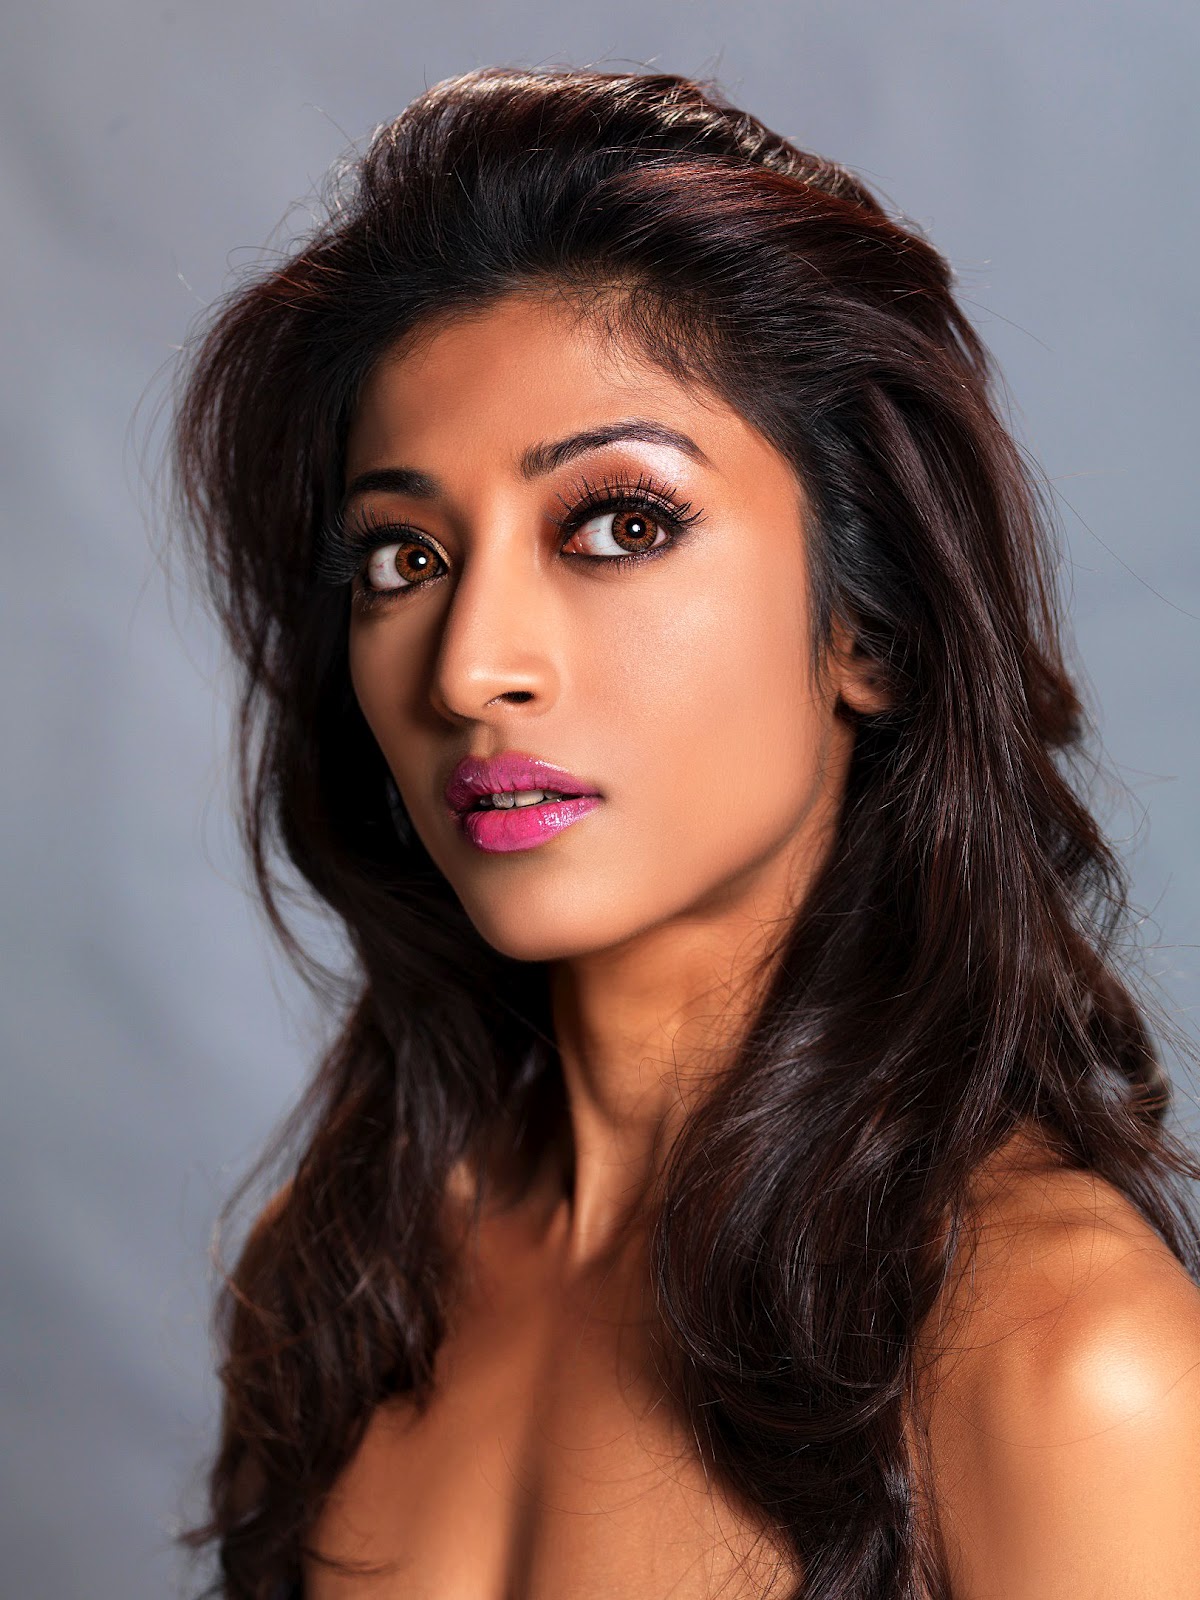 Paoli dam hate story - Adult archive